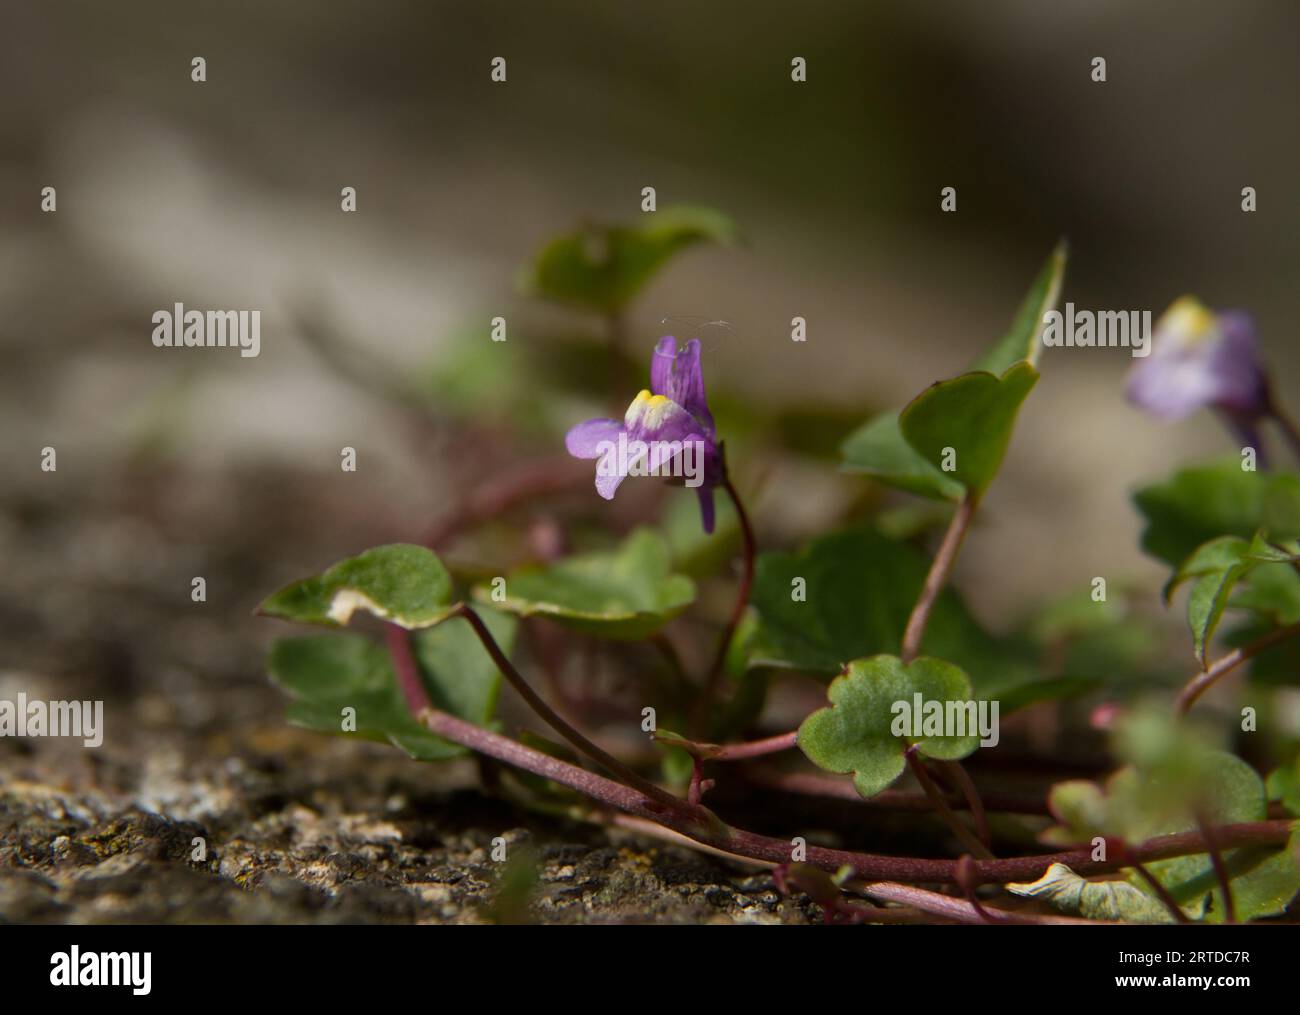 Closeup of the flower of Cymbalaria muralis, ivy-leaved toadflax Stock Photo